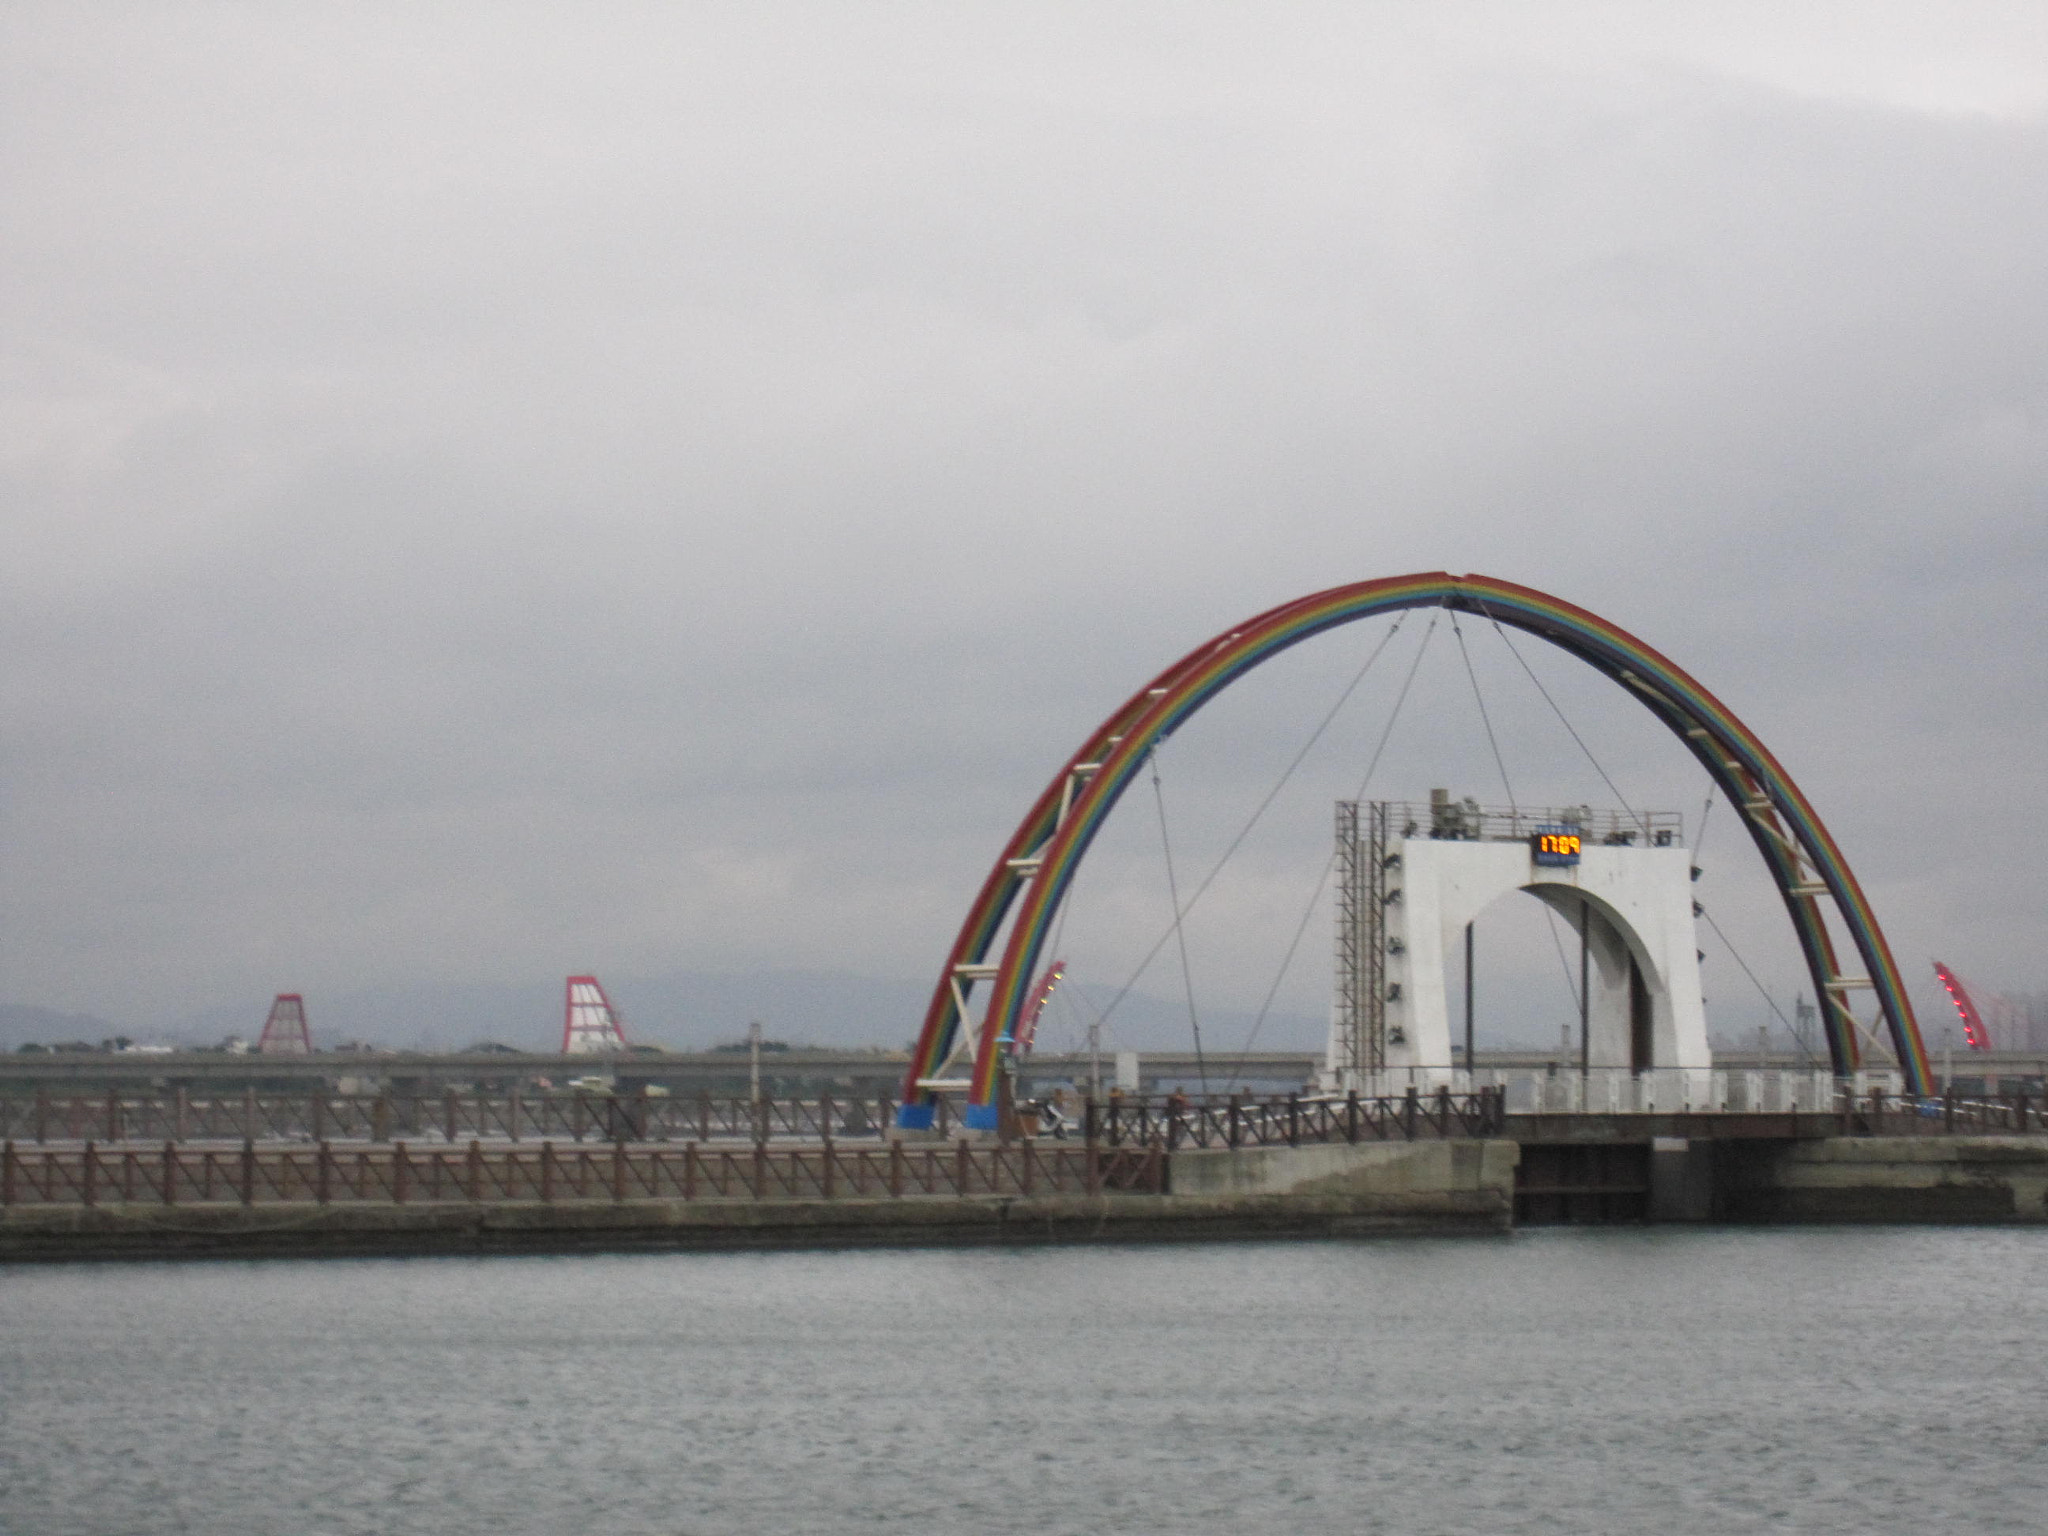 Canon PowerShot SD960 IS (Digital IXUS 110 IS / IXY Digital 510 IS) sample photo. Hsinchu harbor (the old harbor of nanliao) fishing access of rainbow shape gate 新竹漁港(南寮舊港)... photography